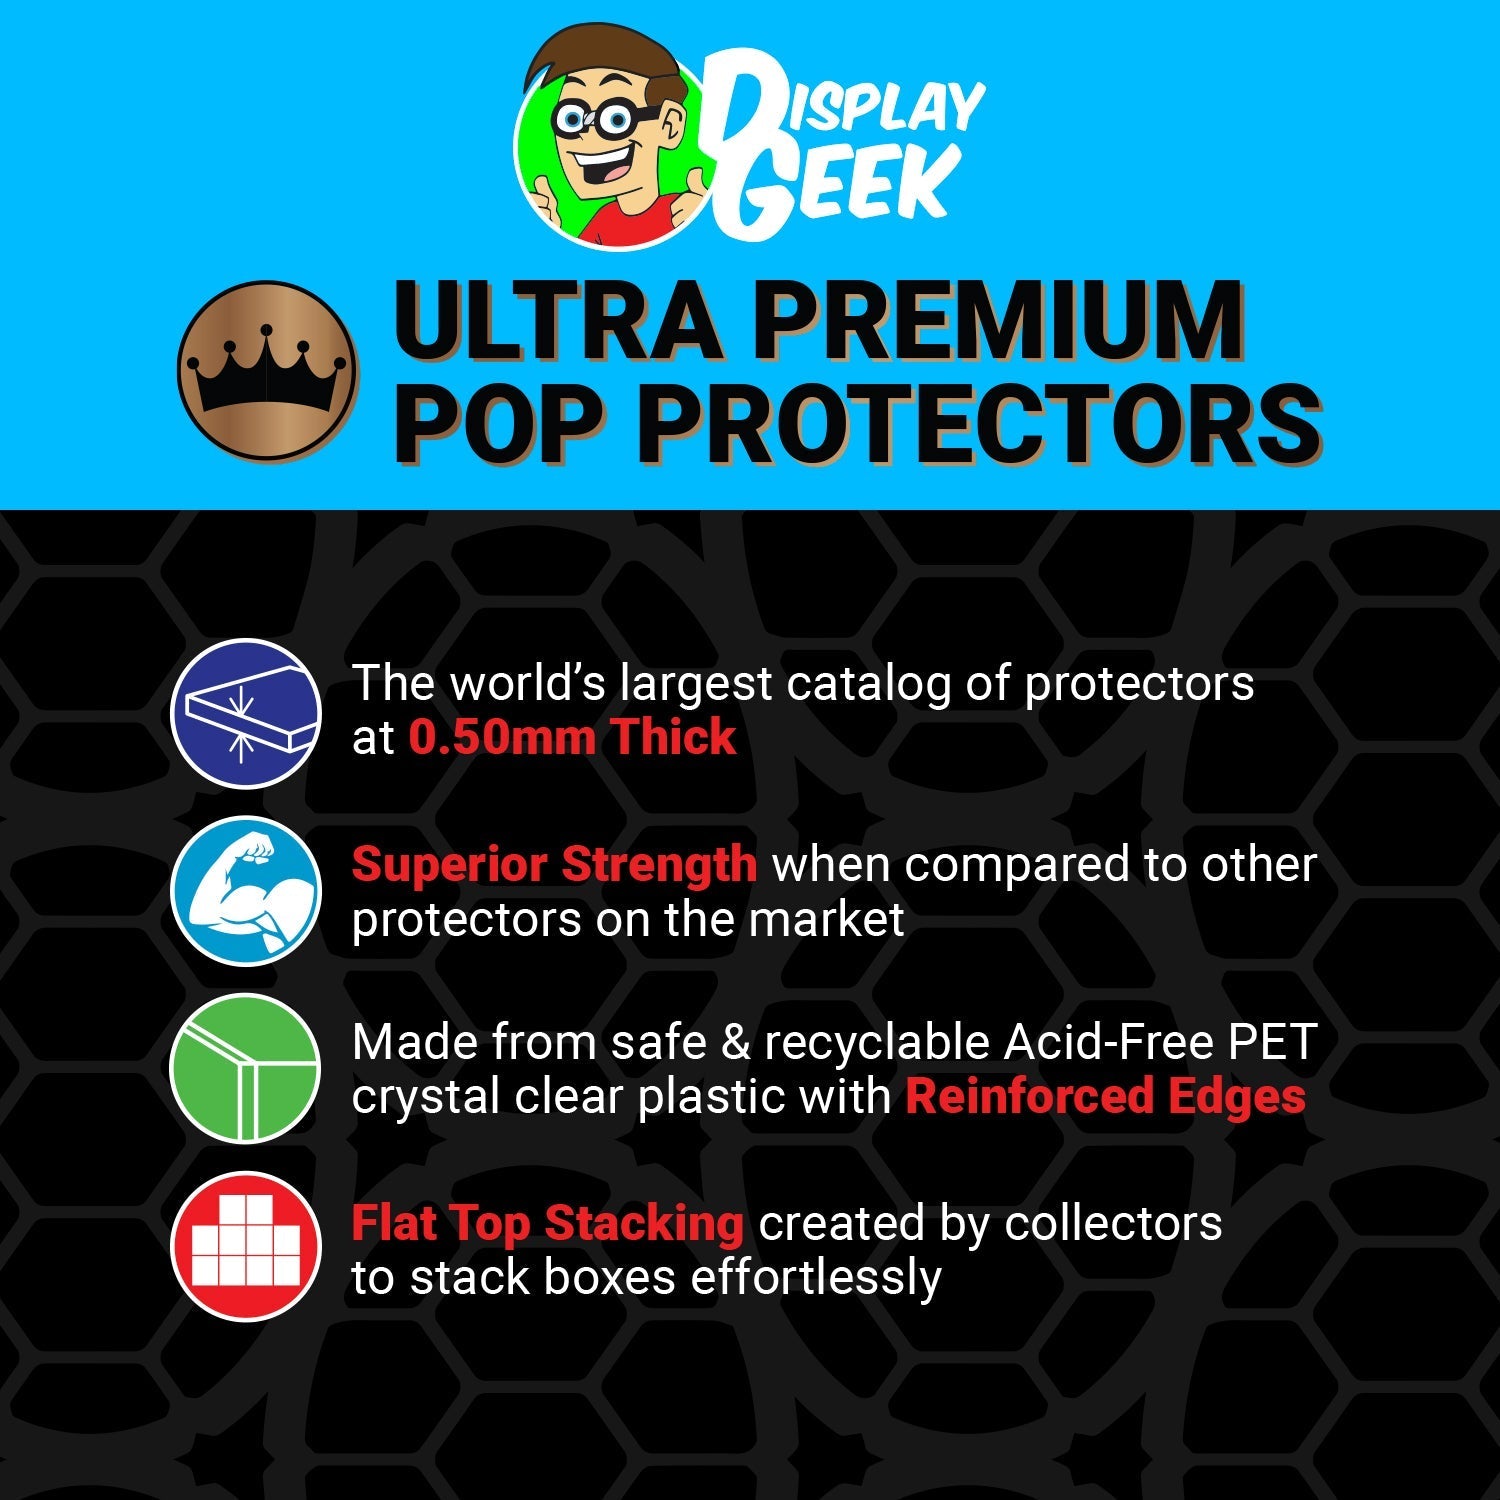 Pop Protector for 10 inch Coca-Cola Polar Bear #59 Jumbo Funko Pop - PPG Pop Protector Guide Search Created by Display Geek